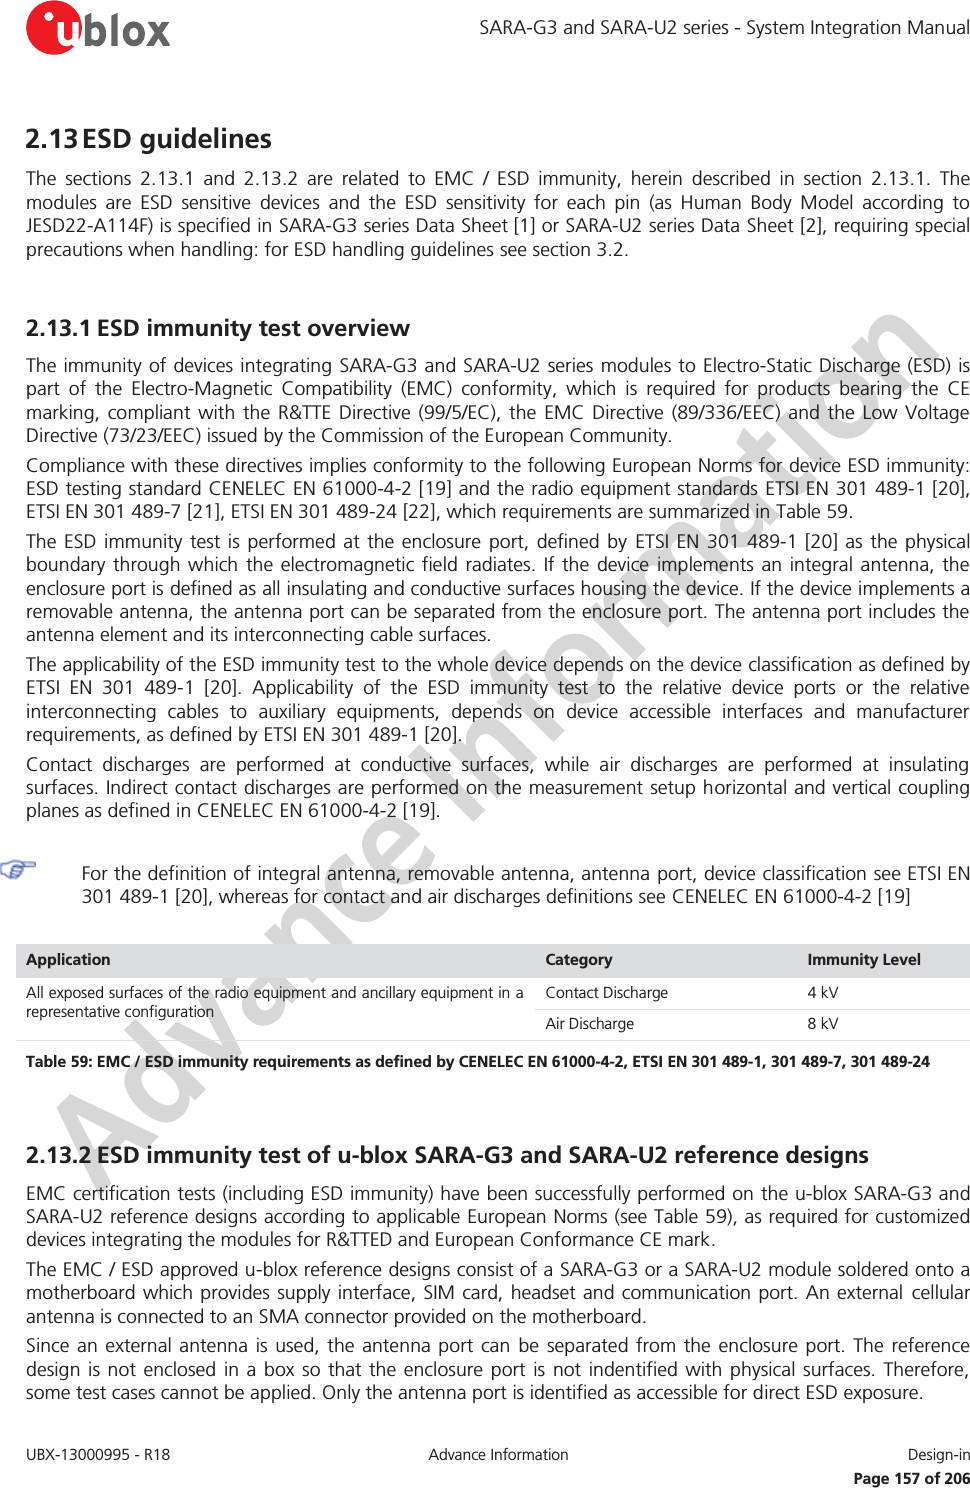 SARA-G3 and SARA-U2 series - System Integration Manual UBX-13000995 - R18  Advance Information  Design-in   Page 157 of 206 2.13 ESD guidelines The sections 2.13.1 and 2.13.2 are related to EMC / ESD immunity, herein described in section 2.13.1. The modules are ESD sensitive devices and the ESD sensitivity for each pin (as Human Body Model according to JESD22-A114F) is specified in SARA-G3 series Data Sheet [1] or SARA-U2 series Data Sheet [2], requiring special precautions when handling: for ESD handling guidelines see section 3.2.  2.13.1 ESD immunity test overview The immunity of devices integrating SARA-G3 and SARA-U2 series modules to Electro-Static Discharge (ESD) is part of the Electro-Magnetic Compatibility (EMC) conformity, which is required for products bearing the CE marking, compliant with the R&amp;TTE Directive (99/5/EC), the EMC Directive (89/336/EEC) and the Low Voltage Directive (73/23/EEC) issued by the Commission of the European Community. Compliance with these directives implies conformity to the following European Norms for device ESD immunity: ESD testing standard CENELEC EN 61000-4-2 [19] and the radio equipment standards ETSI EN 301 489-1 [20], ETSI EN 301 489-7 [21], ETSI EN 301 489-24 [22], which requirements are summarized in Table 59. The ESD immunity test is performed at the enclosure port, defined by ETSI EN 301 489-1 [20] as the physical boundary through which the electromagnetic field radiates. If the device implements an integral antenna, the enclosure port is defined as all insulating and conductive surfaces housing the device. If the device implements a removable antenna, the antenna port can be separated from the enclosure port. The antenna port includes the antenna element and its interconnecting cable surfaces. The applicability of the ESD immunity test to the whole device depends on the device classification as defined by ETSI EN 301 489-1 [20]. Applicability of the ESD immunity test to the relative device ports or the relative interconnecting cables to auxiliary equipments, depends on device accessible interfaces and manufacturer requirements, as defined by ETSI EN 301 489-1 [20]. Contact discharges are performed at conductive surfaces, while air discharges are performed at insulating surfaces. Indirect contact discharges are performed on the measurement setup horizontal and vertical coupling planes as defined in CENELEC EN 61000-4-2 [19].   For the definition of integral antenna, removable antenna, antenna port, device classification see ETSI EN 301 489-1 [20], whereas for contact and air discharges definitions see CENELEC EN 61000-4-2 [19]  Application  Category  Immunity Level All exposed surfaces of the radio equipment and ancillary equipment in a representative configuration Contact Discharge  4 kV Air Discharge  8 kV Table 59: EMC / ESD immunity requirements as defined by CENELEC EN 61000-4-2, ETSI EN 301 489-1, 301 489-7, 301 489-24   2.13.2 ESD immunity test of u-blox SARA-G3 and SARA-U2 reference designs EMC certification tests (including ESD immunity) have been successfully performed on the u-blox SARA-G3 and SARA-U2 reference designs according to applicable European Norms (see Table 59), as required for customized devices integrating the modules for R&amp;TTED and European Conformance CE mark. The EMC / ESD approved u-blox reference designs consist of a SARA-G3 or a SARA-U2 module soldered onto a motherboard which provides supply interface, SIM card, headset and communication port. An external cellular antenna is connected to an SMA connector provided on the motherboard. Since an external antenna is used, the antenna port can be separated from the enclosure port. The reference design is not enclosed in a box so that the enclosure port is not indentified with physical surfaces. Therefore, some test cases cannot be applied. Only the antenna port is identified as accessible for direct ESD exposure. 